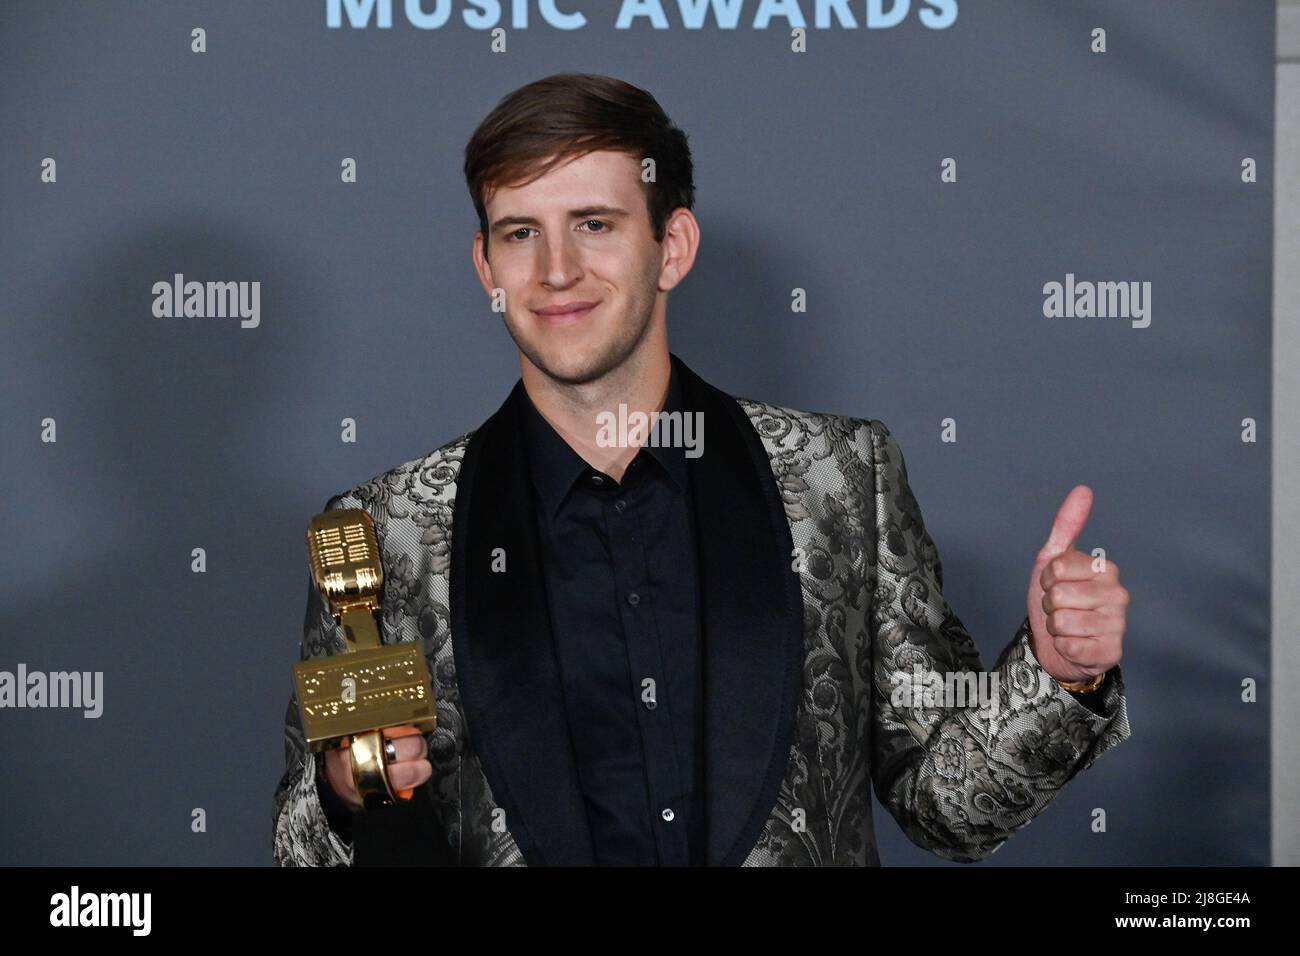 Las Vegas, United States. 16th May, 2022. Illenium appears backstage with his award during the annual Billboard Music Awards held at the MGM Grand Garden Arena in Las Vegas on May 15, 2022. The musician was honored with Top Dance/Electronic Album for 'Fallen Embers'. Photo by Jim Ruymen/UPI Credit: UPI/Alamy Live News Stock Photo